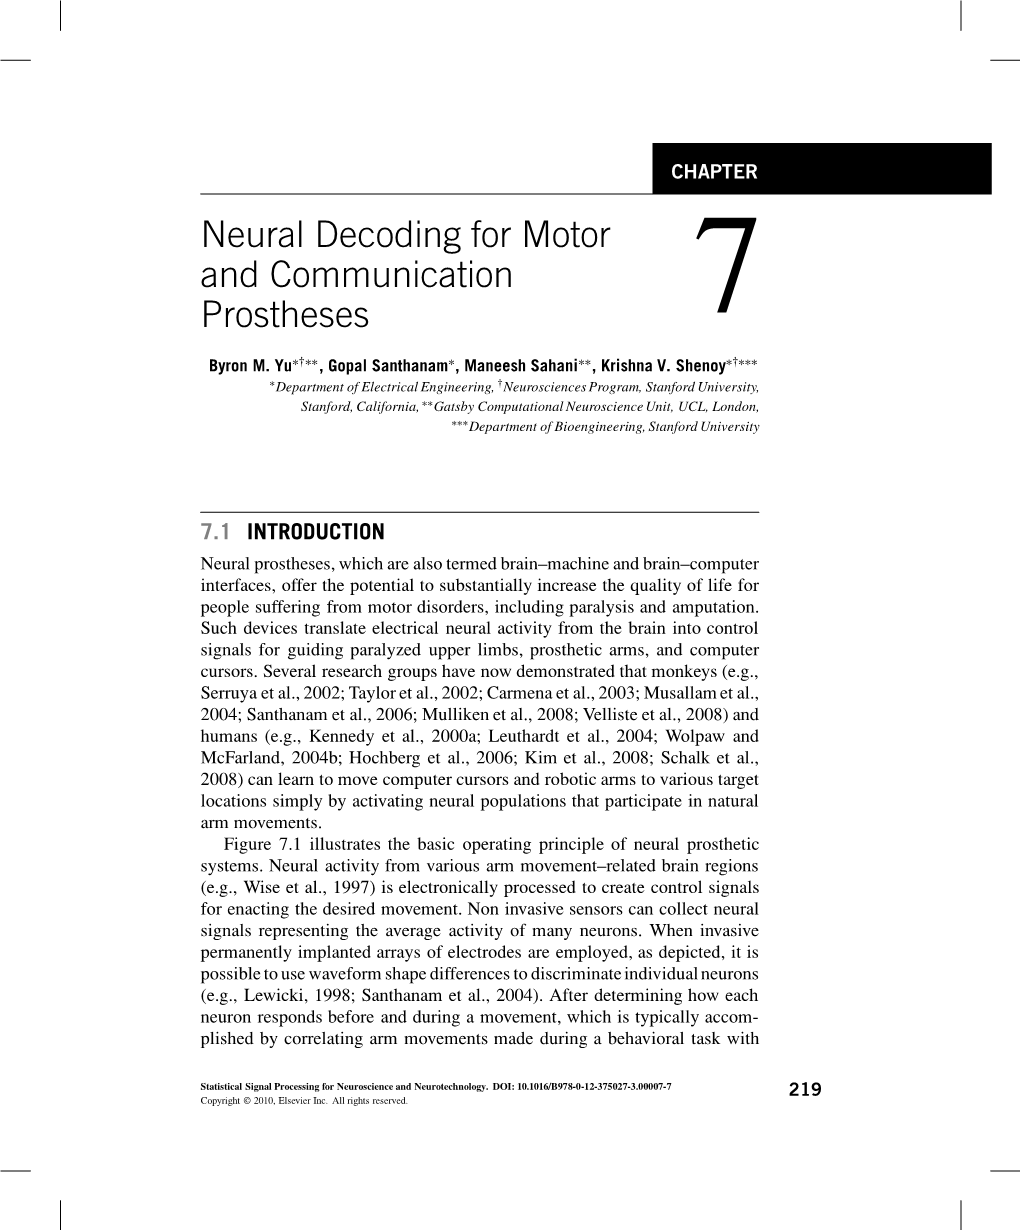 Neural Decoding for Motor and Communication Prostheses 7